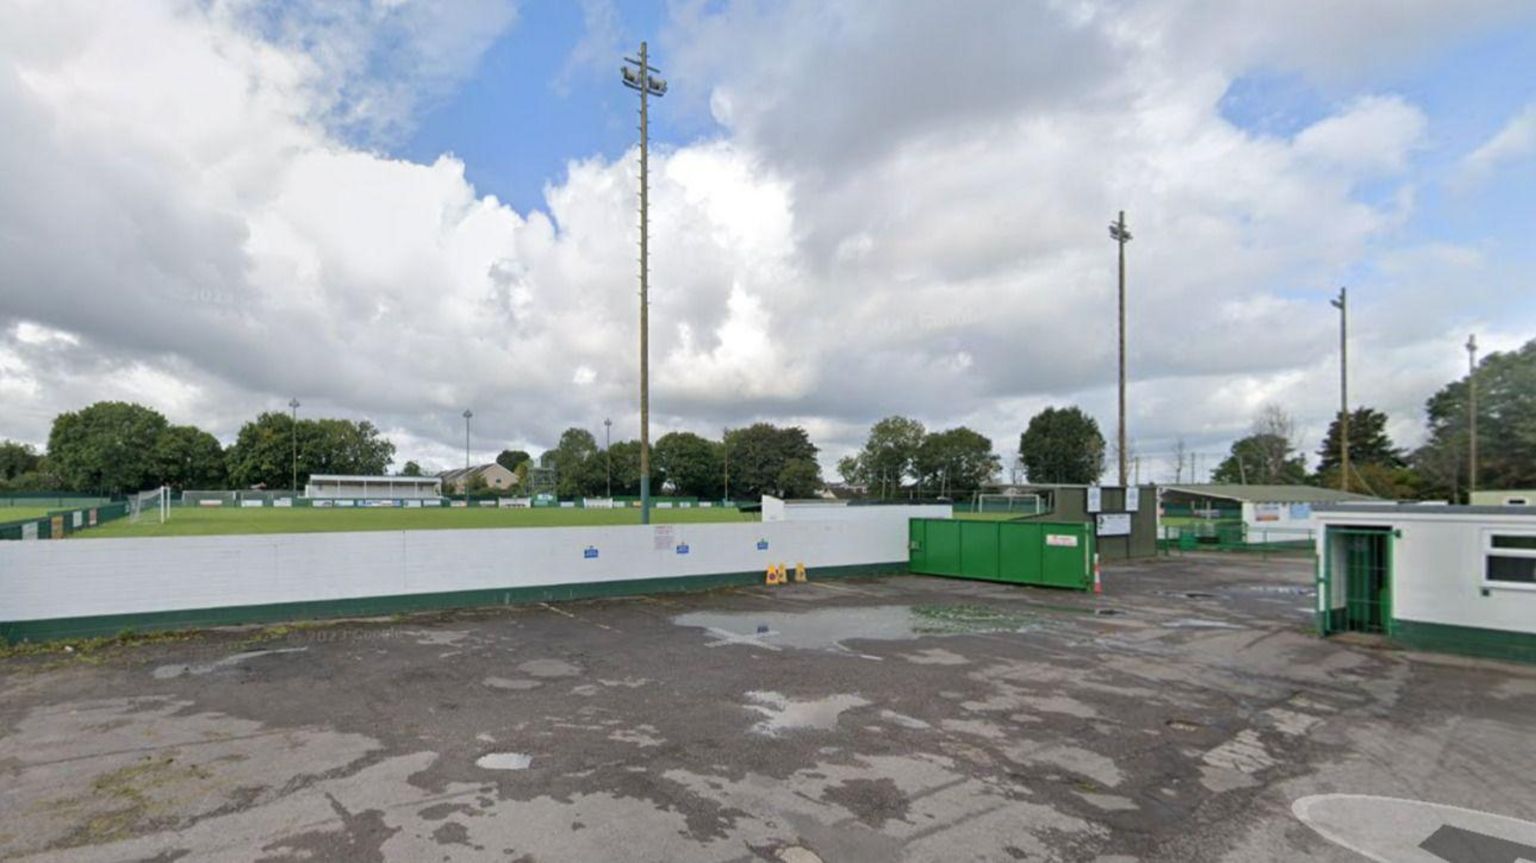 Village football club granted late alcohol licence